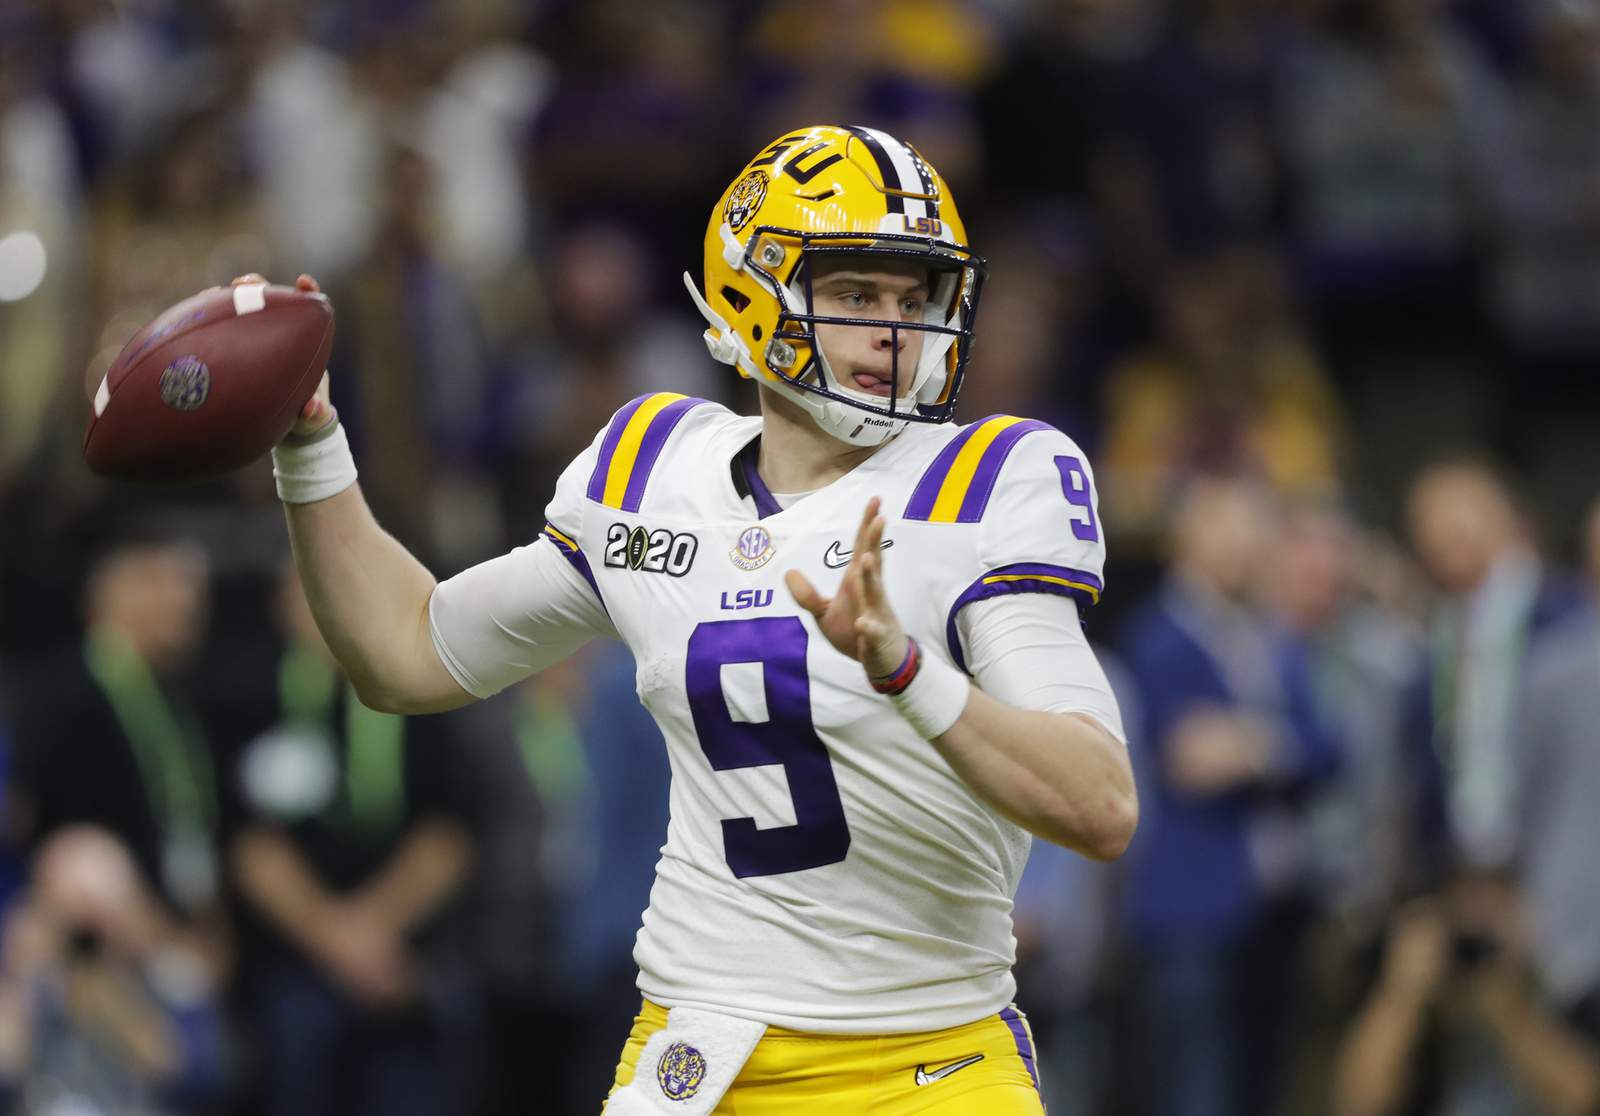 AP Top 25 Podcast: Looking for 2020's Burrow or Baylor